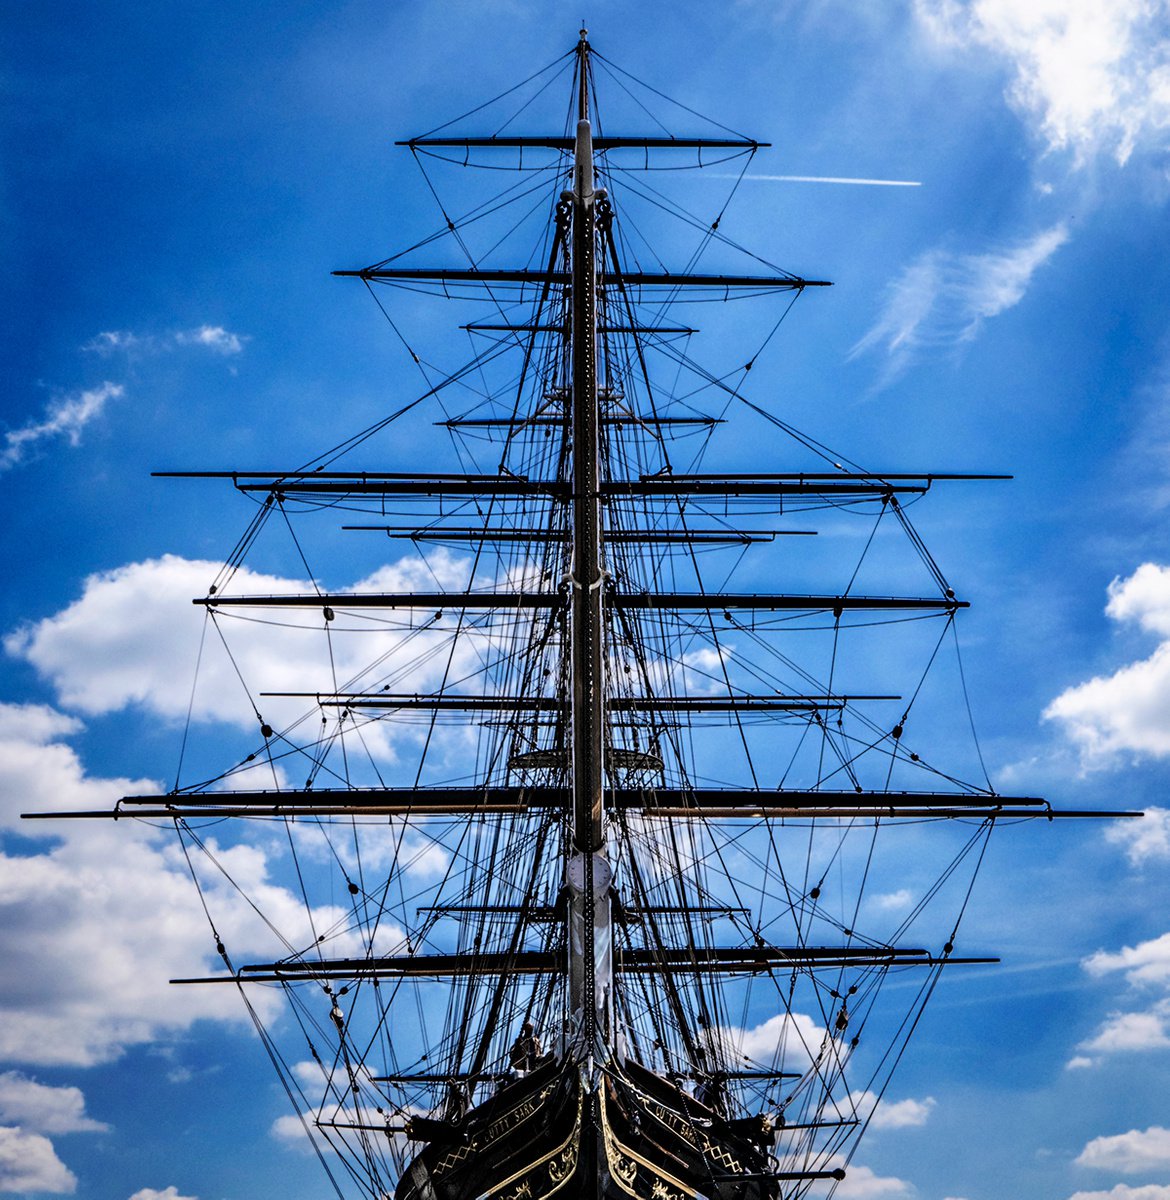 The Cutty Sark by Vincent Abbey